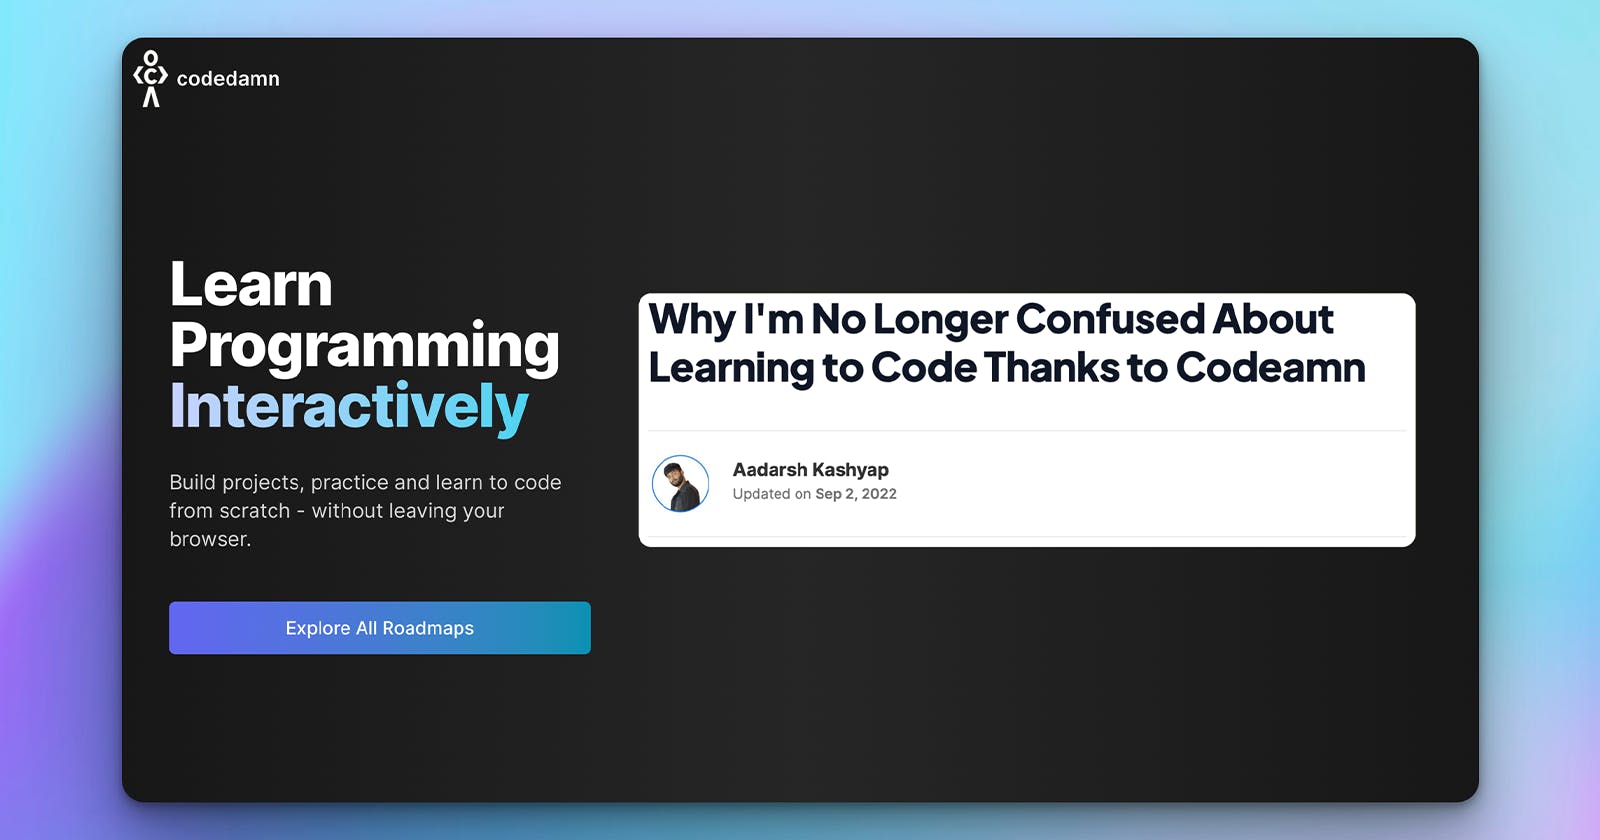 Why I'm No Longer Confused About Learning to Code Thanks to Codedamn